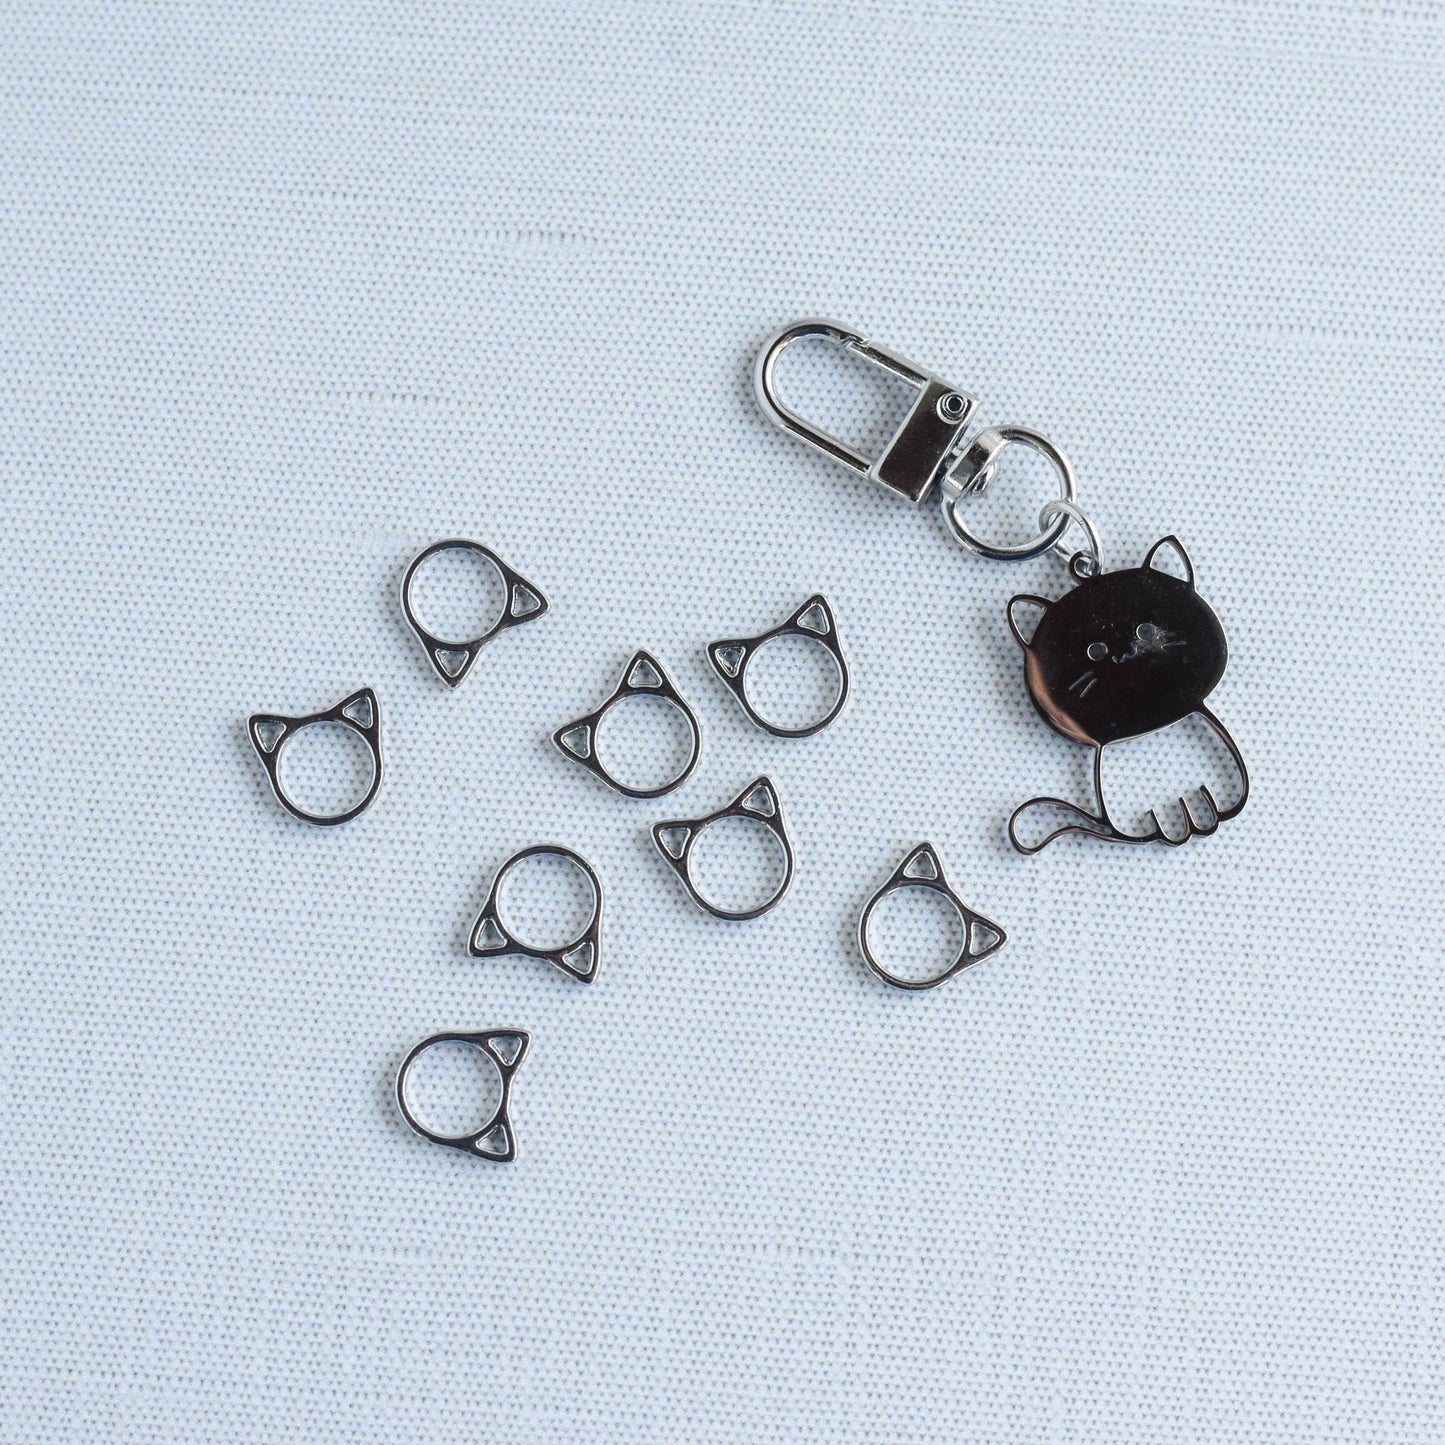 Set of 8 Cat Stitch Markers plus Holder, Cat Lover Stitch Markers, Snag Free Stitch Markers, Small Stitch Markers